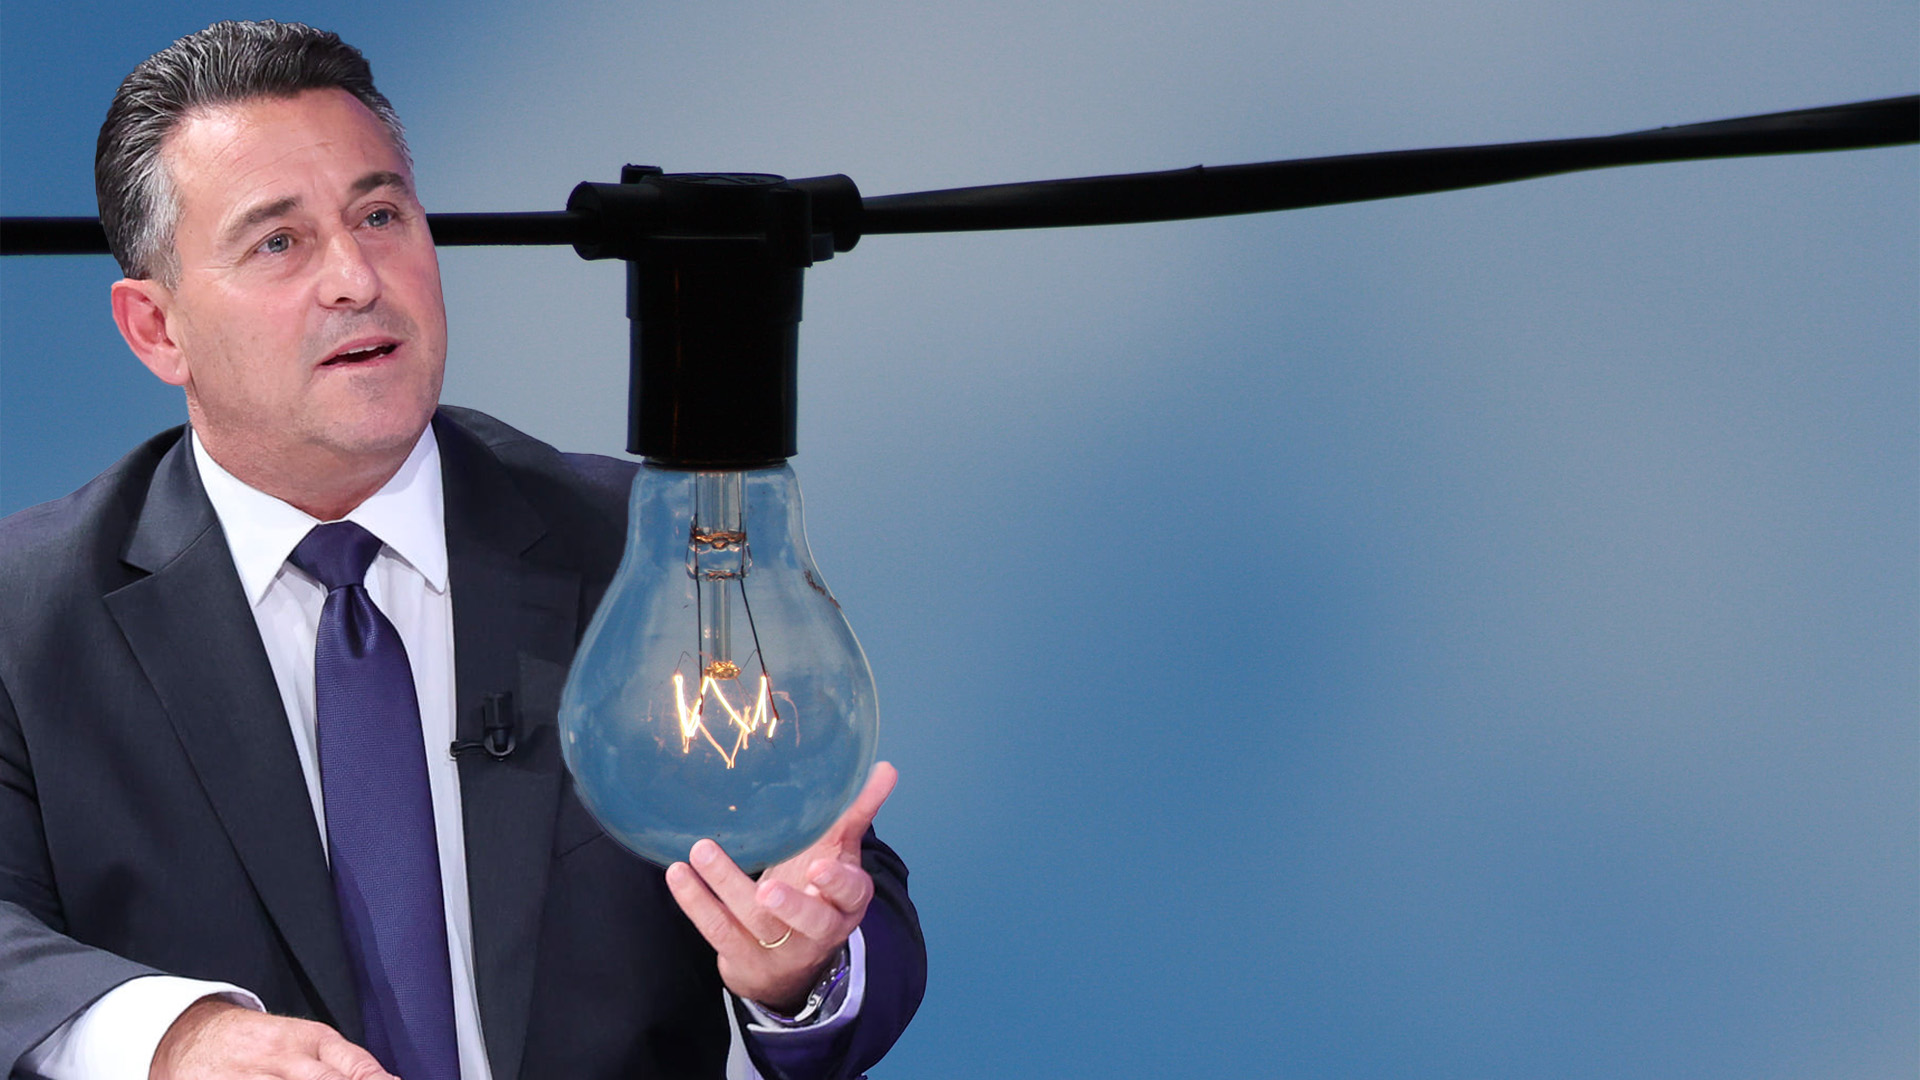 Every Household Experiencing Power Cuts Should Get Automatically Reimbursed, PN Says